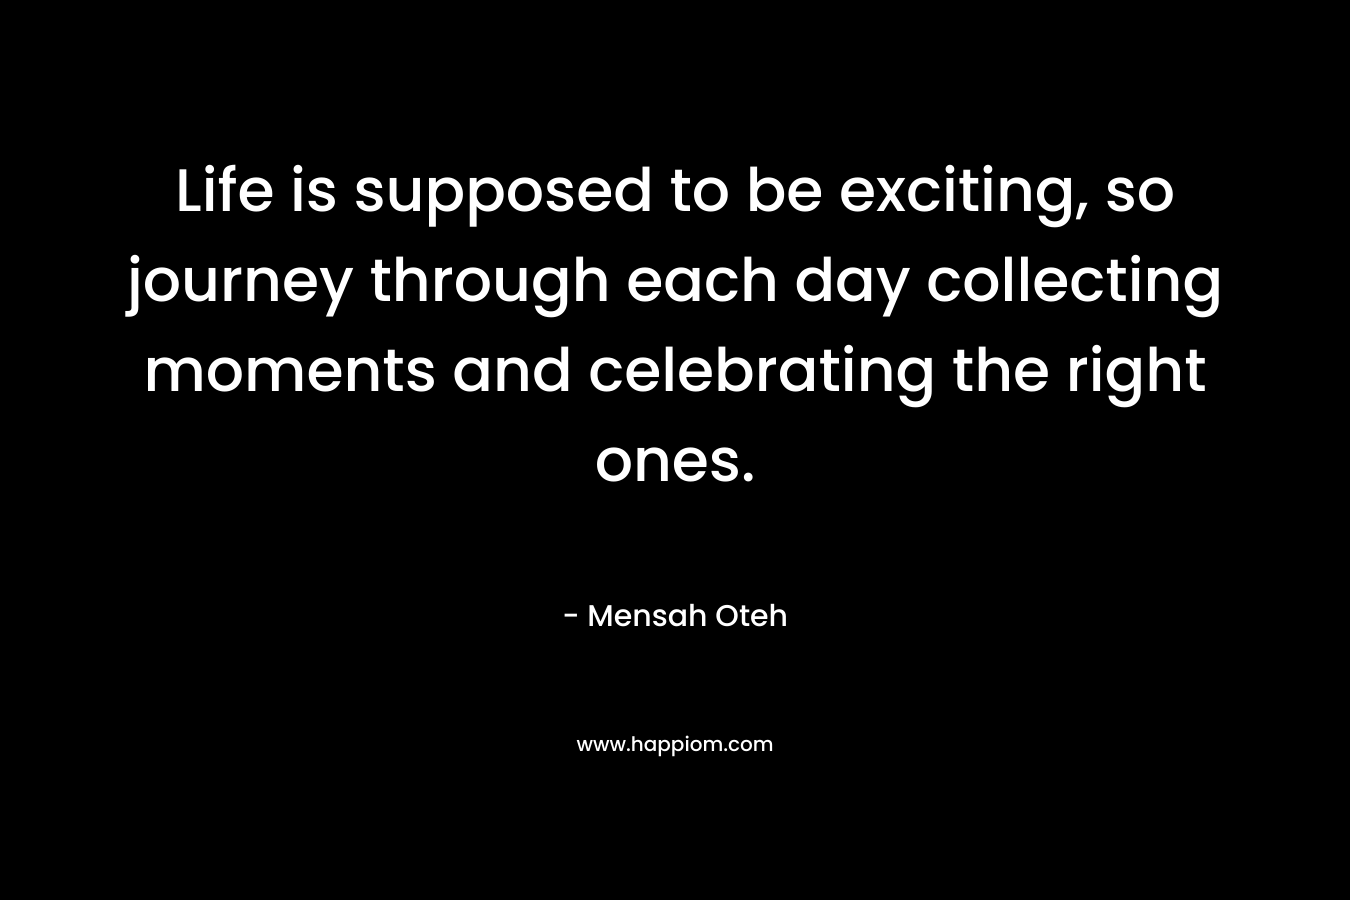 Life is supposed to be exciting, so journey through each day collecting moments and celebrating the right ones.